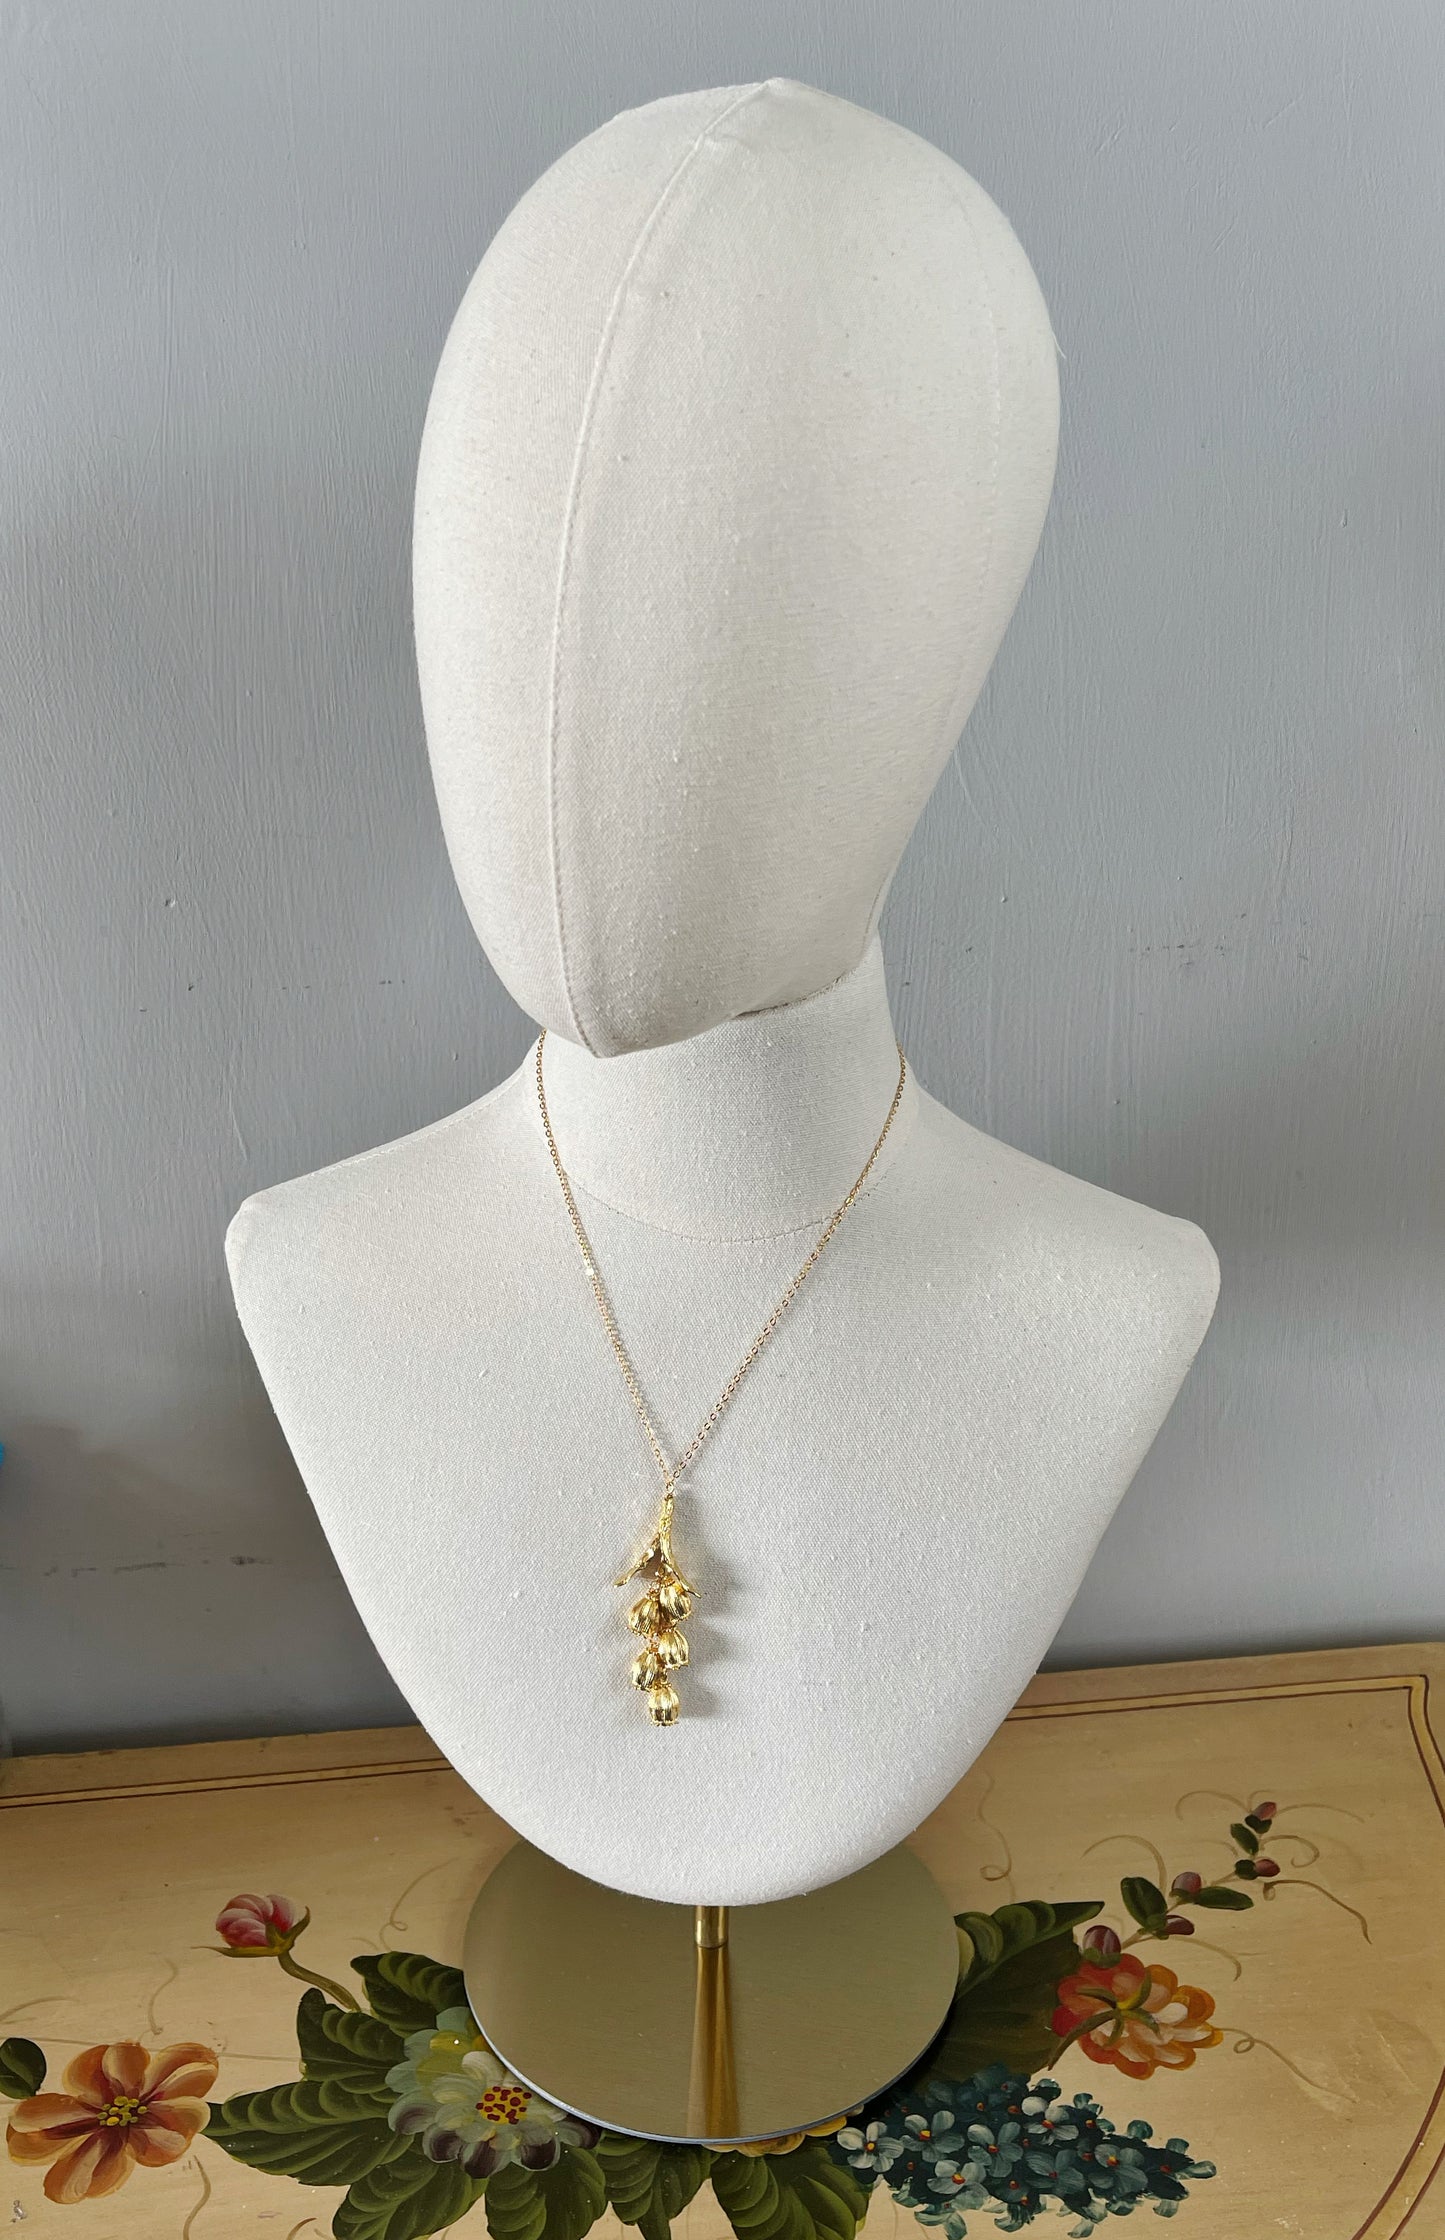 Lily of the valley 24K gold plated necklace